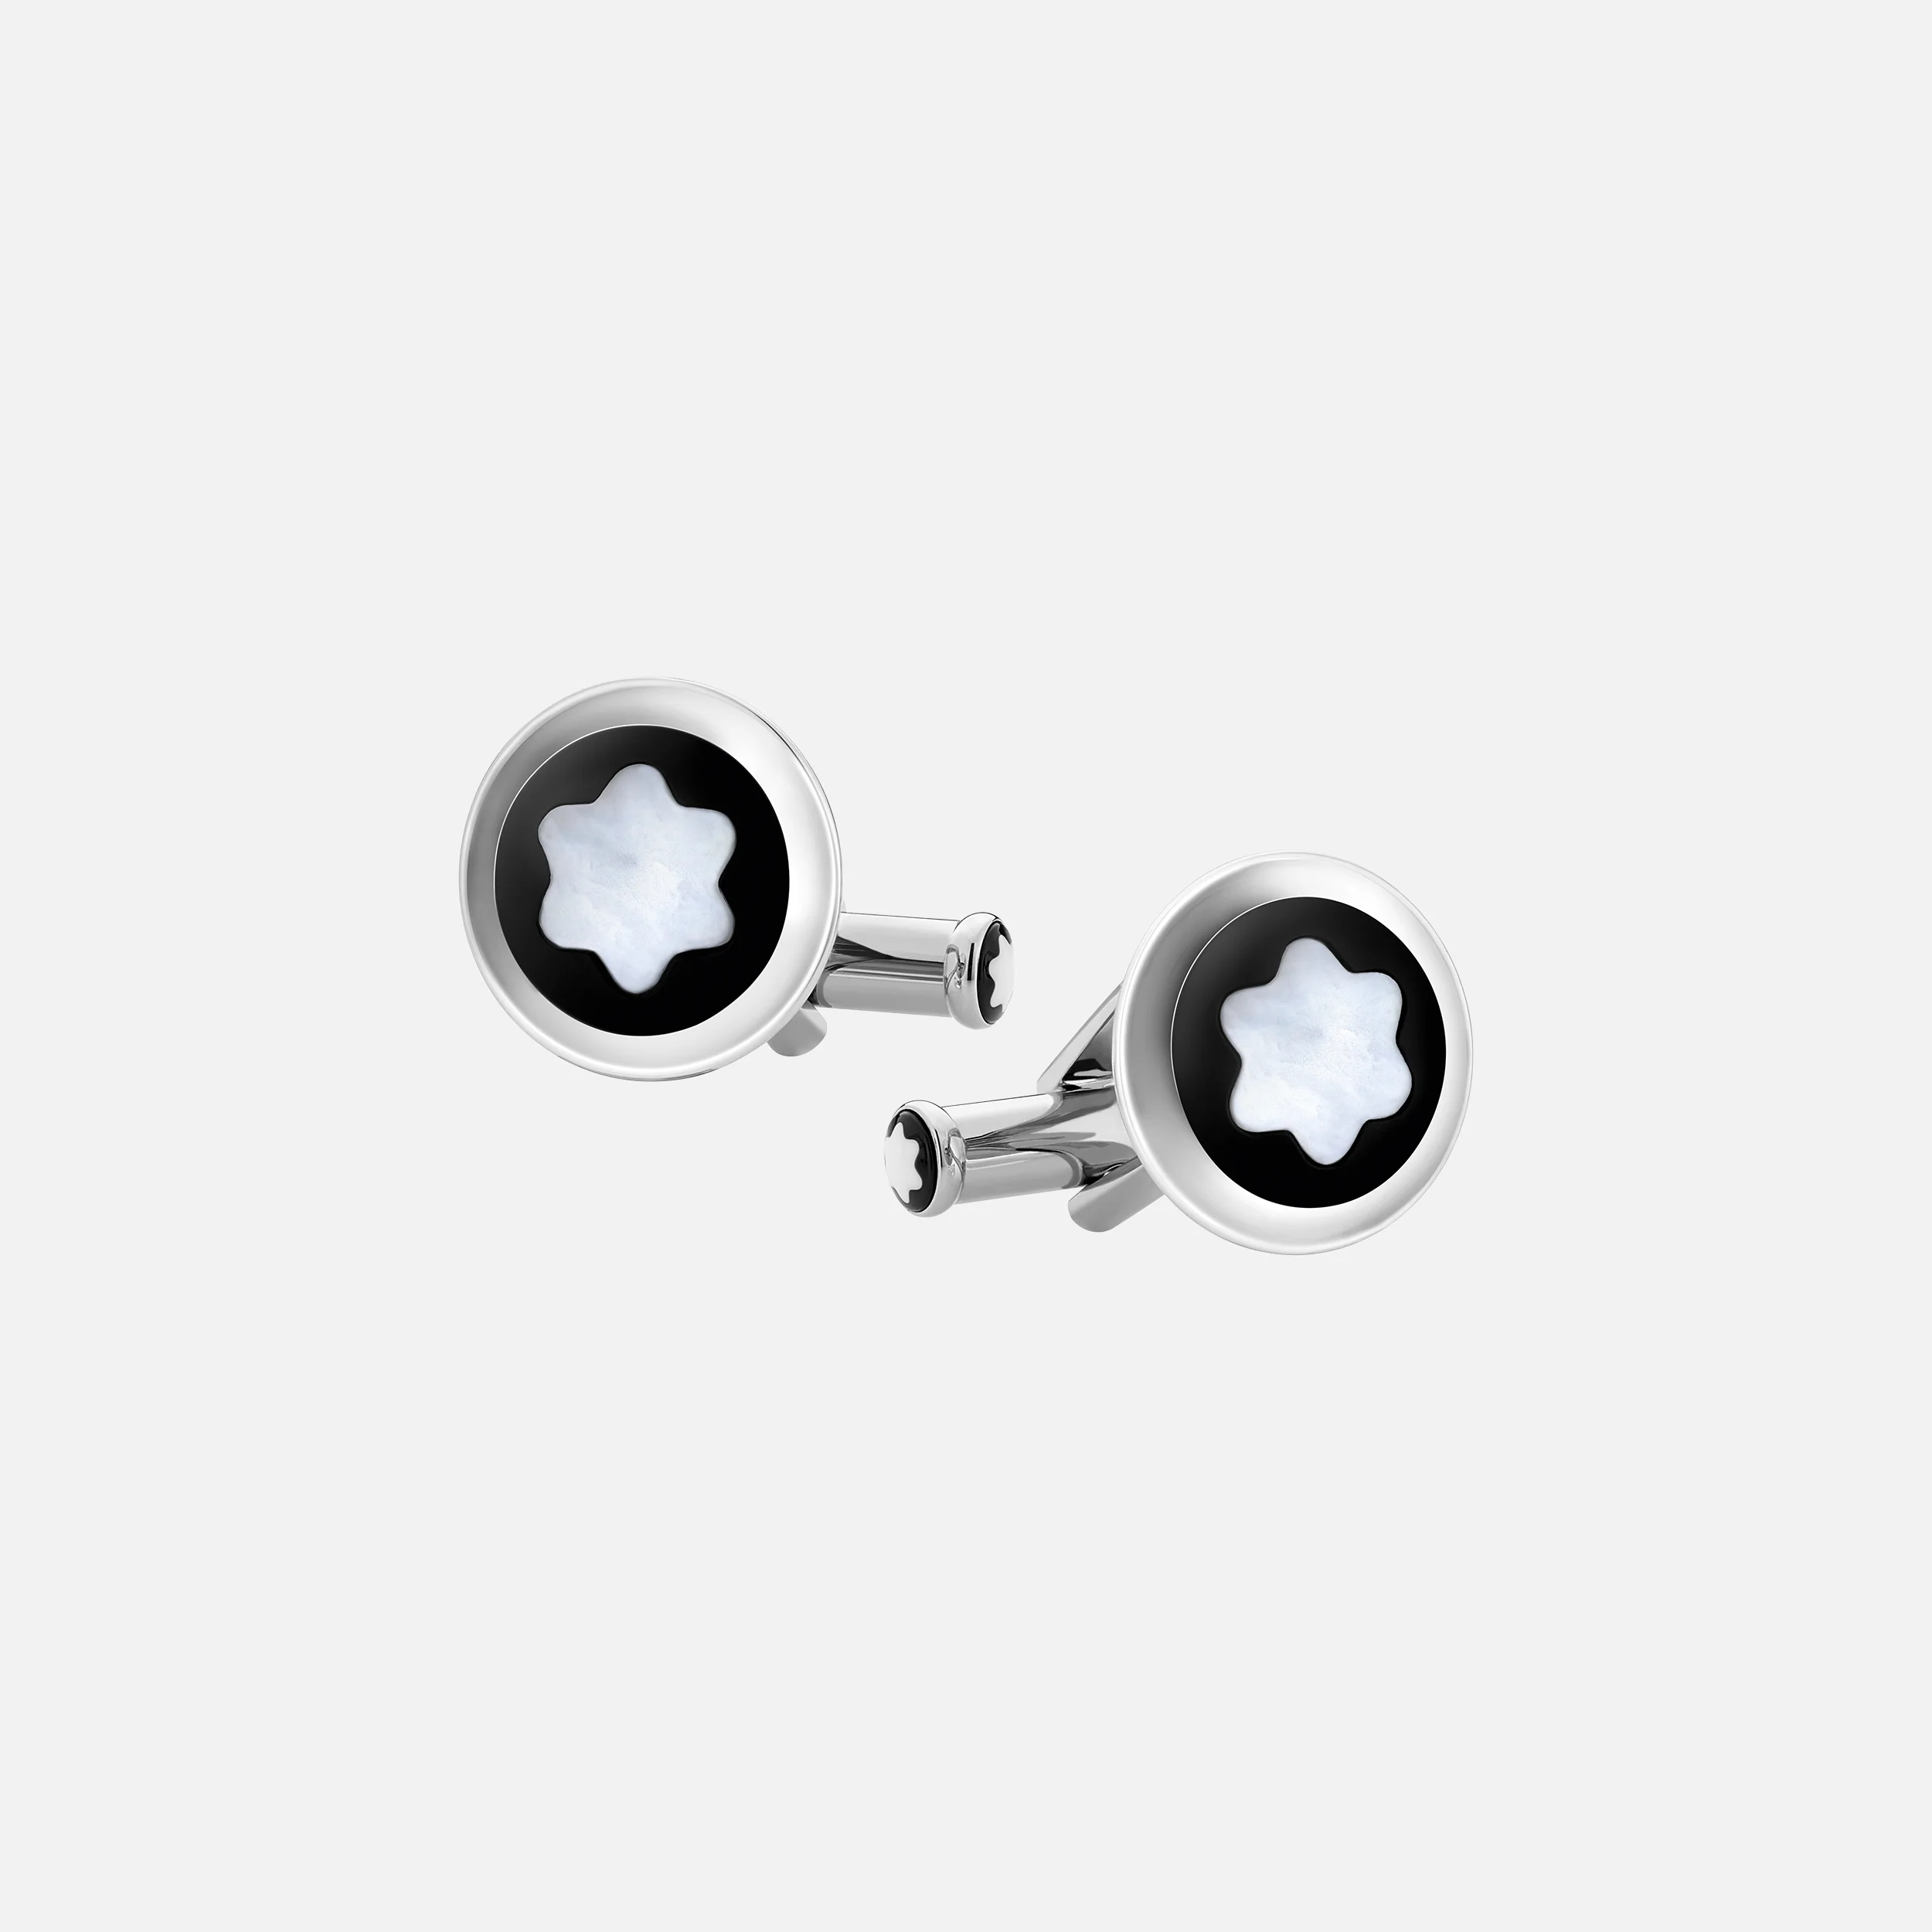 Montblanc Cufflink Round Stainless Stainless Steel with Black PVD Inlay and Mother-of-Pearl Snowcap Emblem - Pencraft the boutique